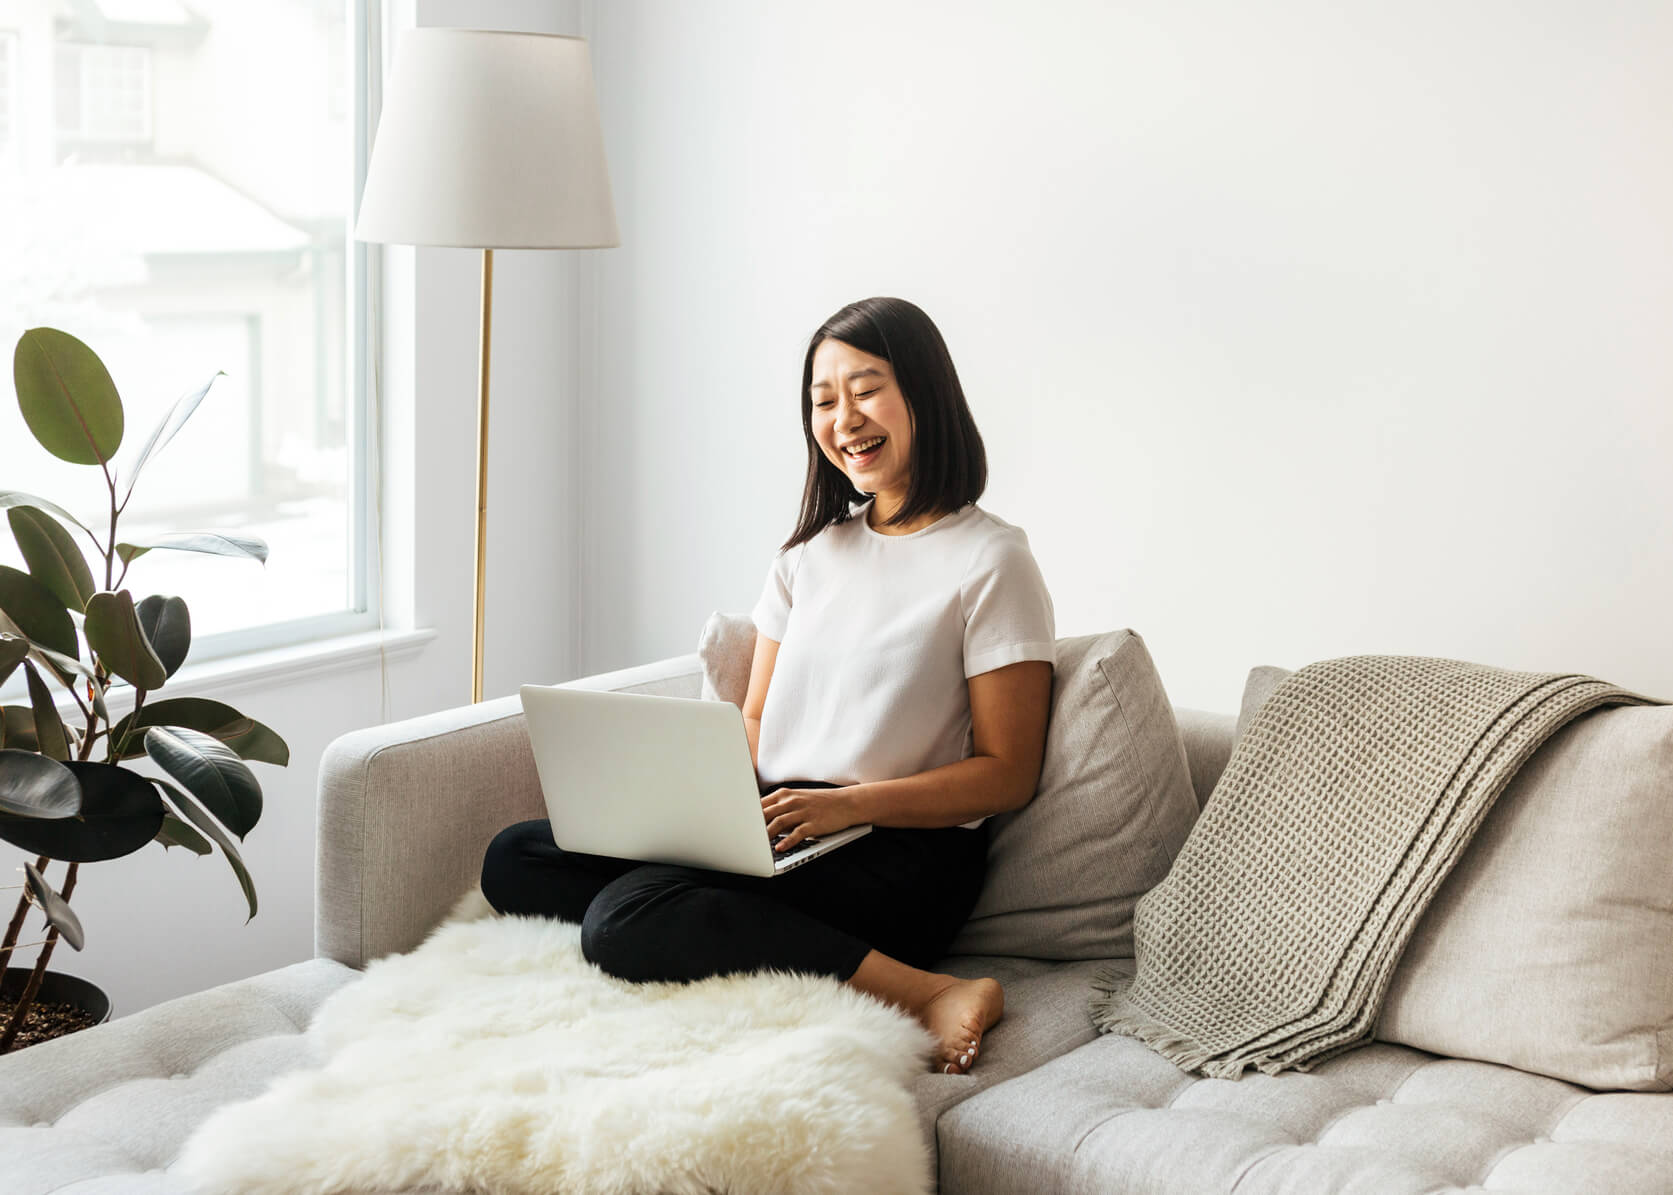 A smiling woman sits on her couch with an open laptop